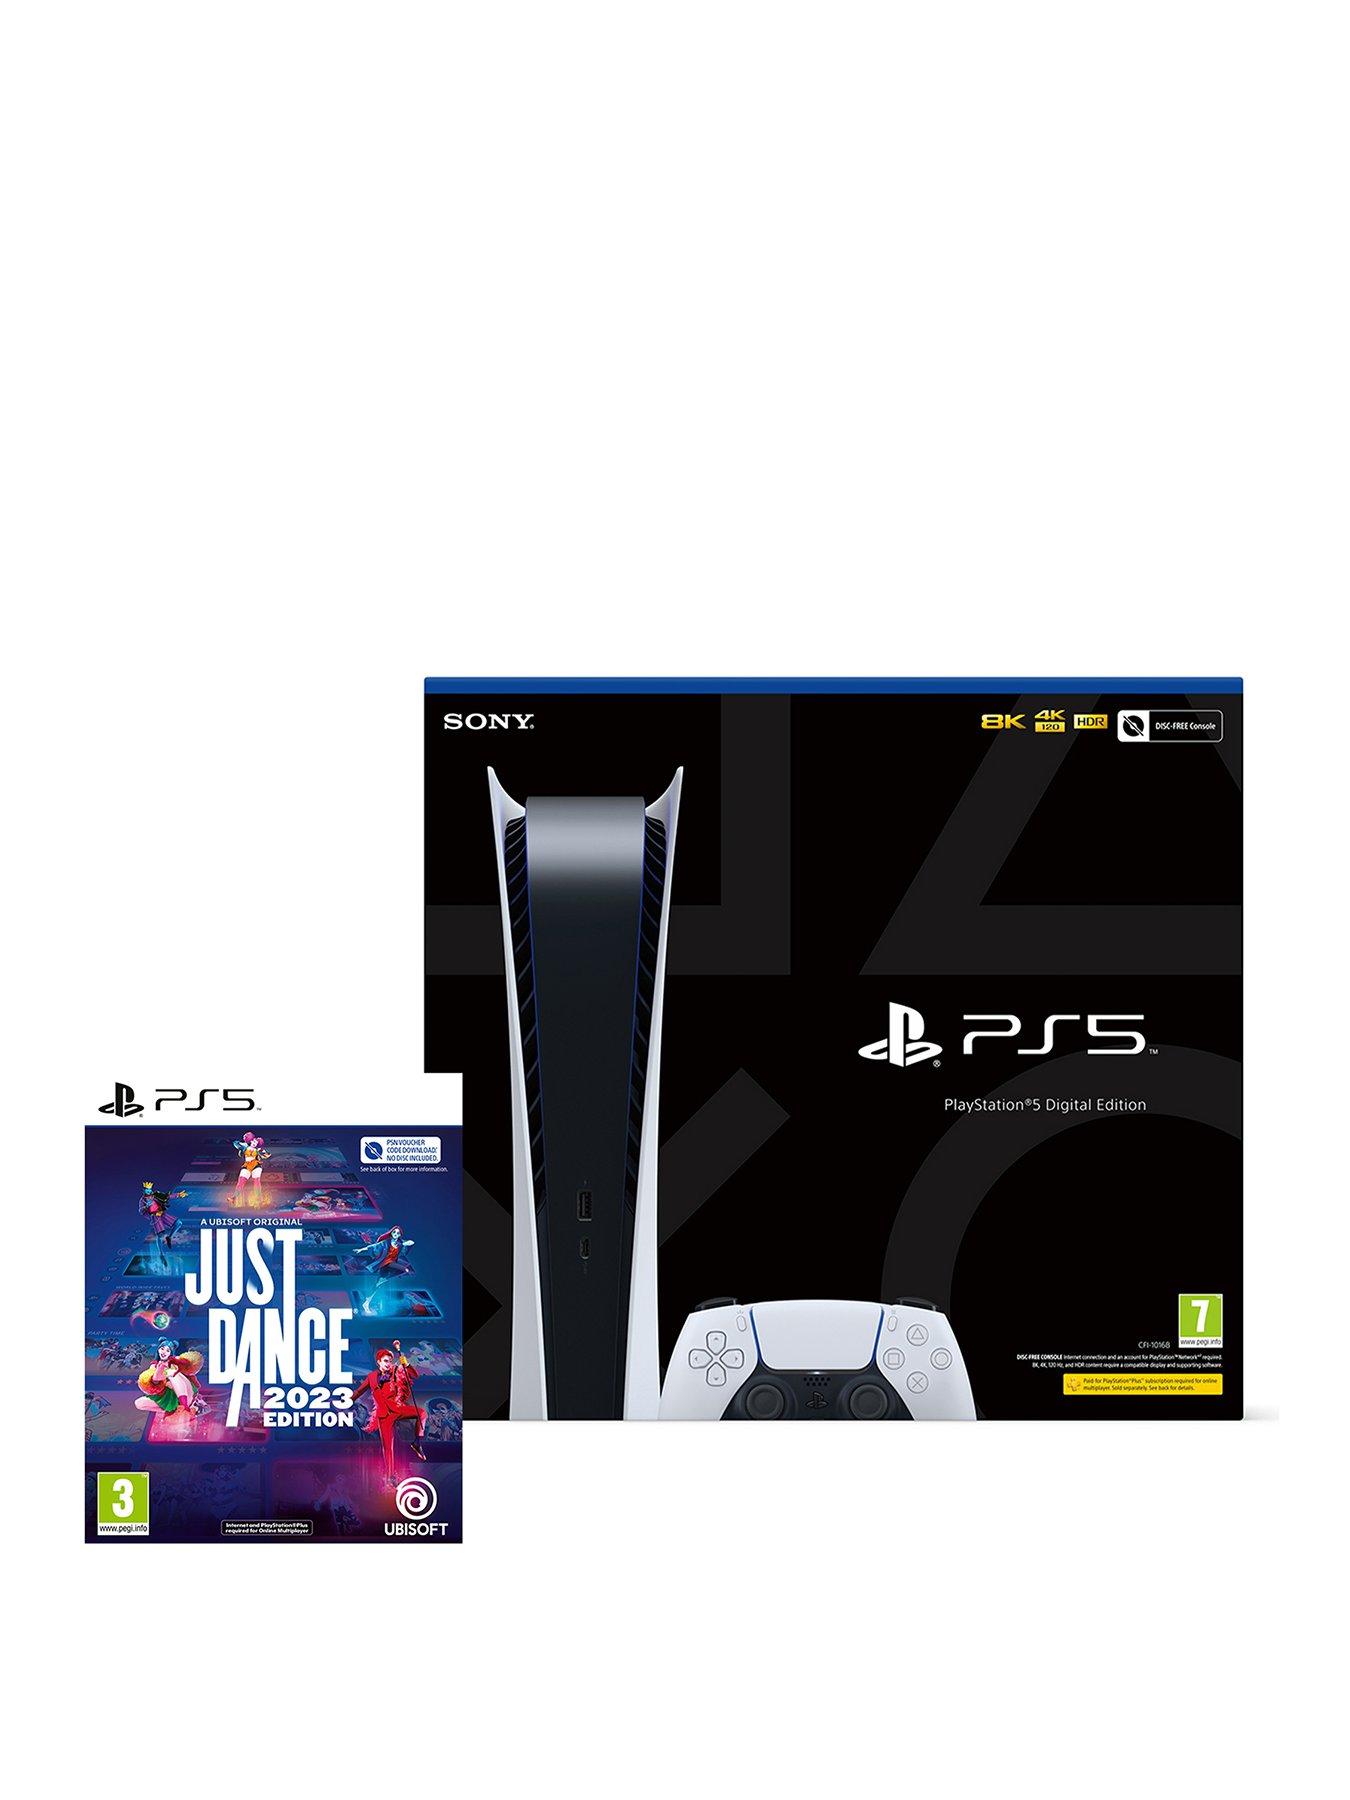 Just Dance 2023 Ultimate Edition on PS5 — price history